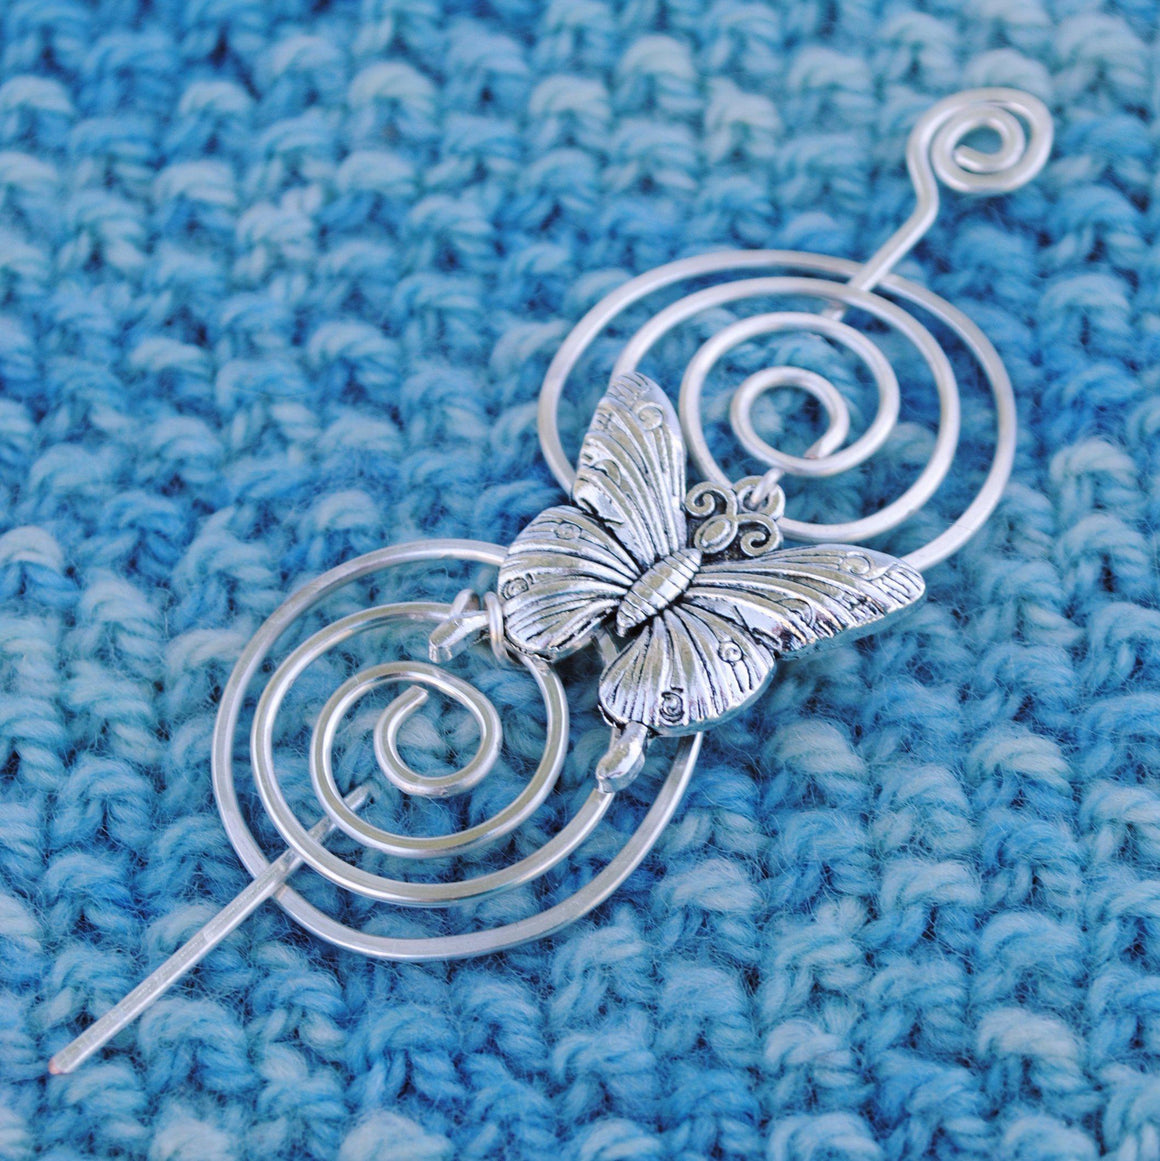 Shawl Pin, Butterfly Shawl Pin - Charmed Silver - Crafty Flutterby Creations